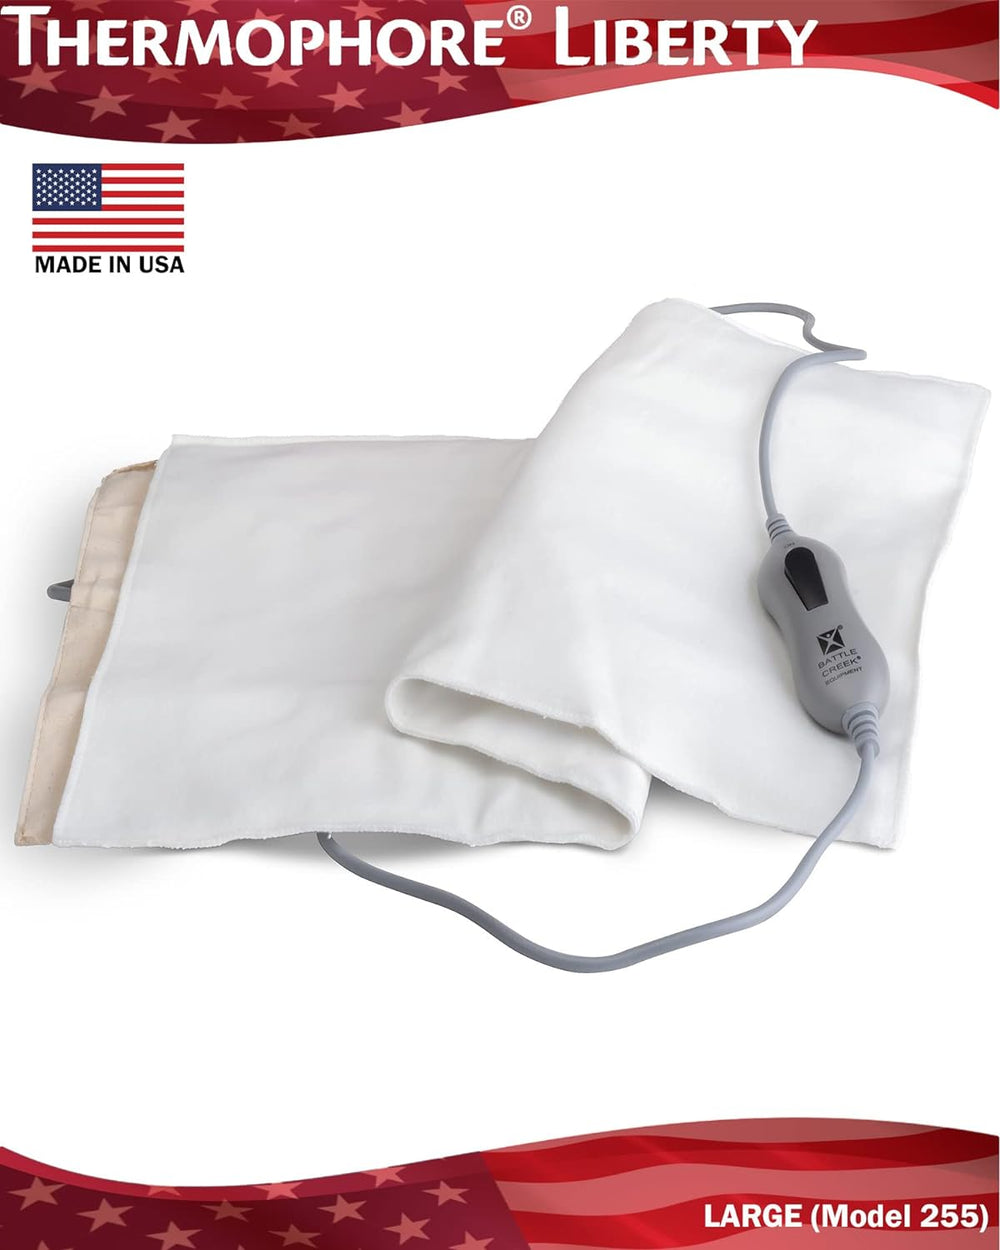 Thermophore Heating Pads Thermophore Liberty Plus (USA Assembled) Moist Heat Pack (Model 255) Large (14 x 27) Heating Pad